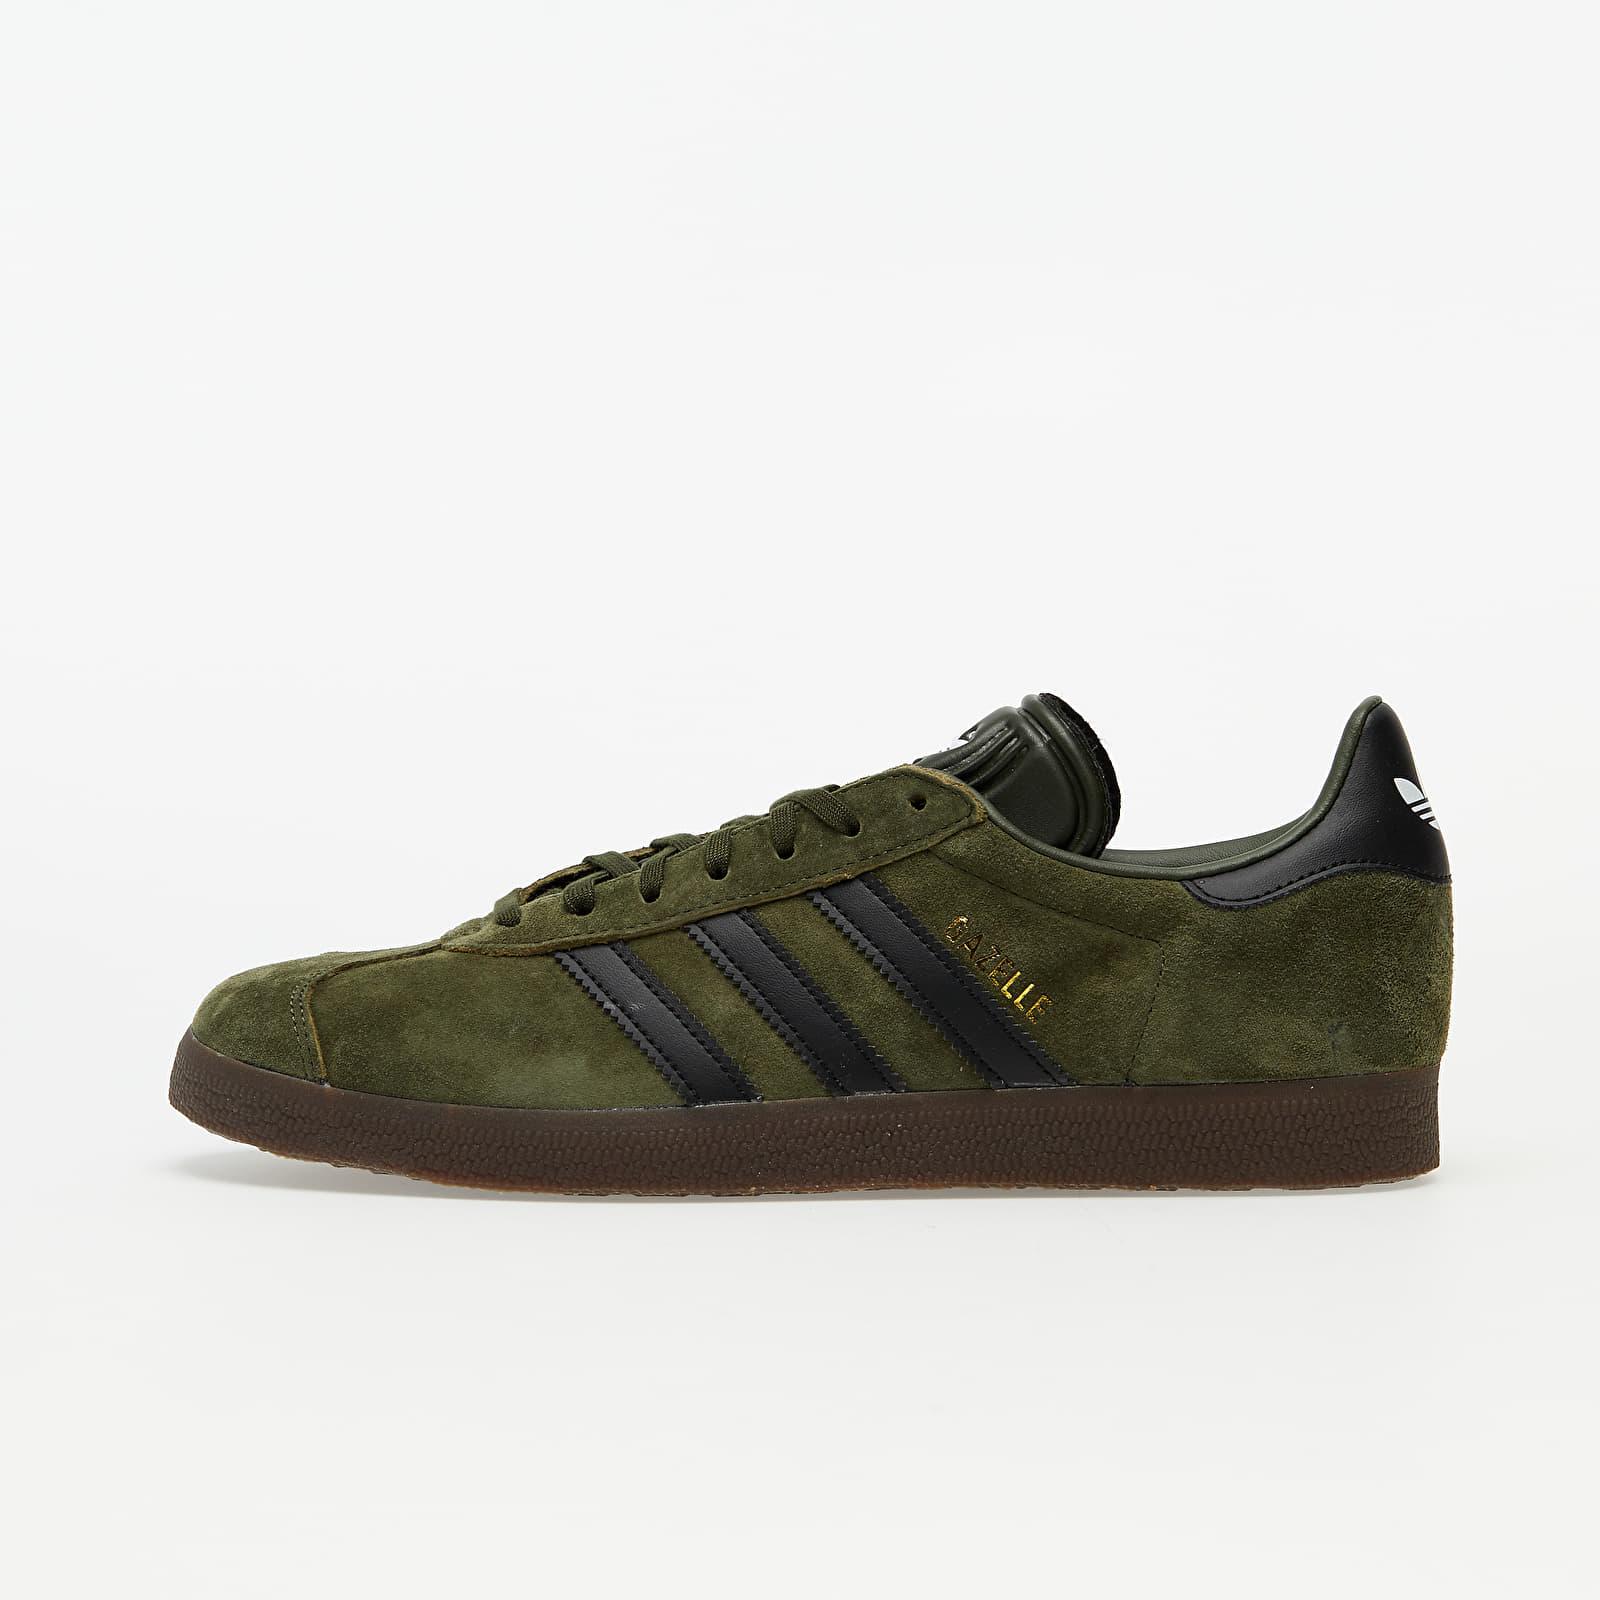 adidas gazelle green and black, super sell Hit A 76% Discount -  statehouse.gov.sl